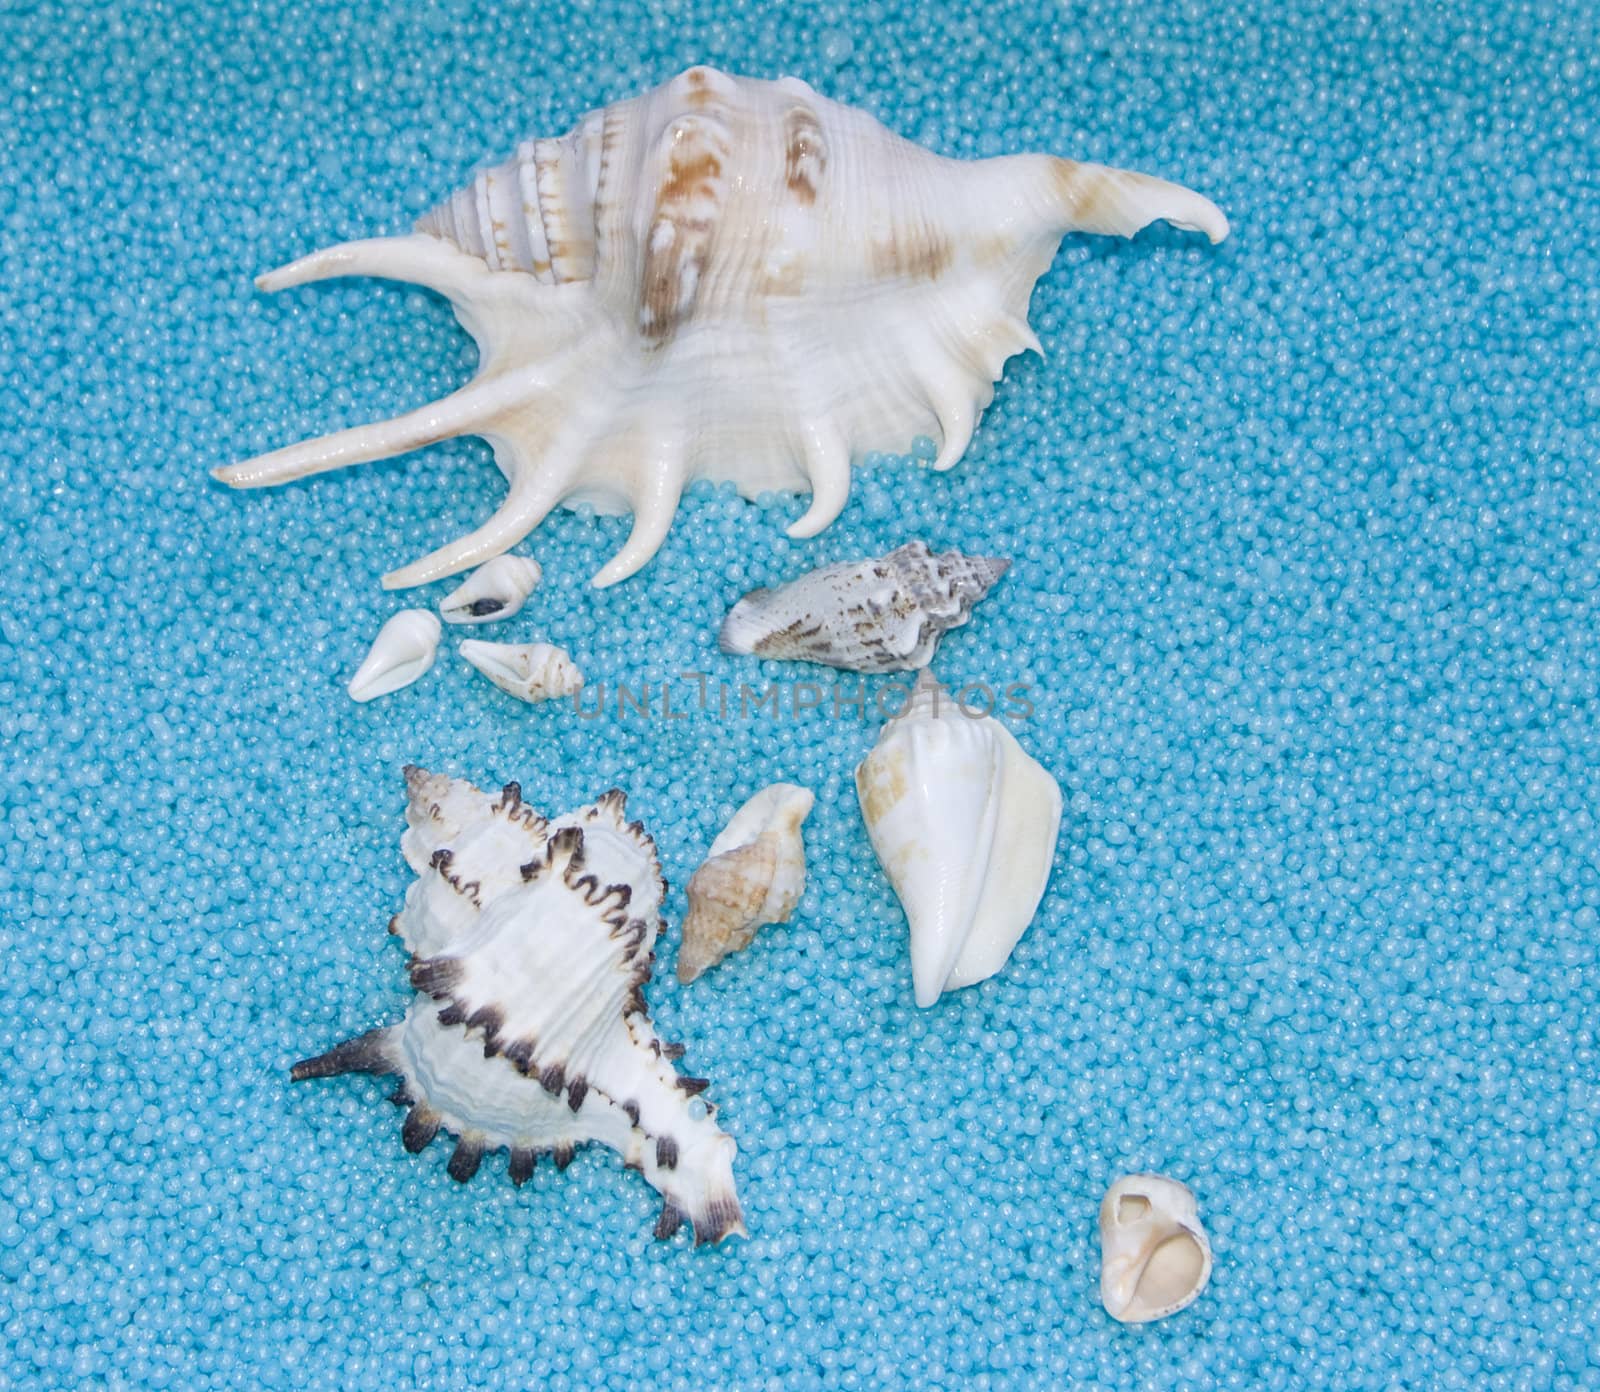 The image of cockleshells on a blue background